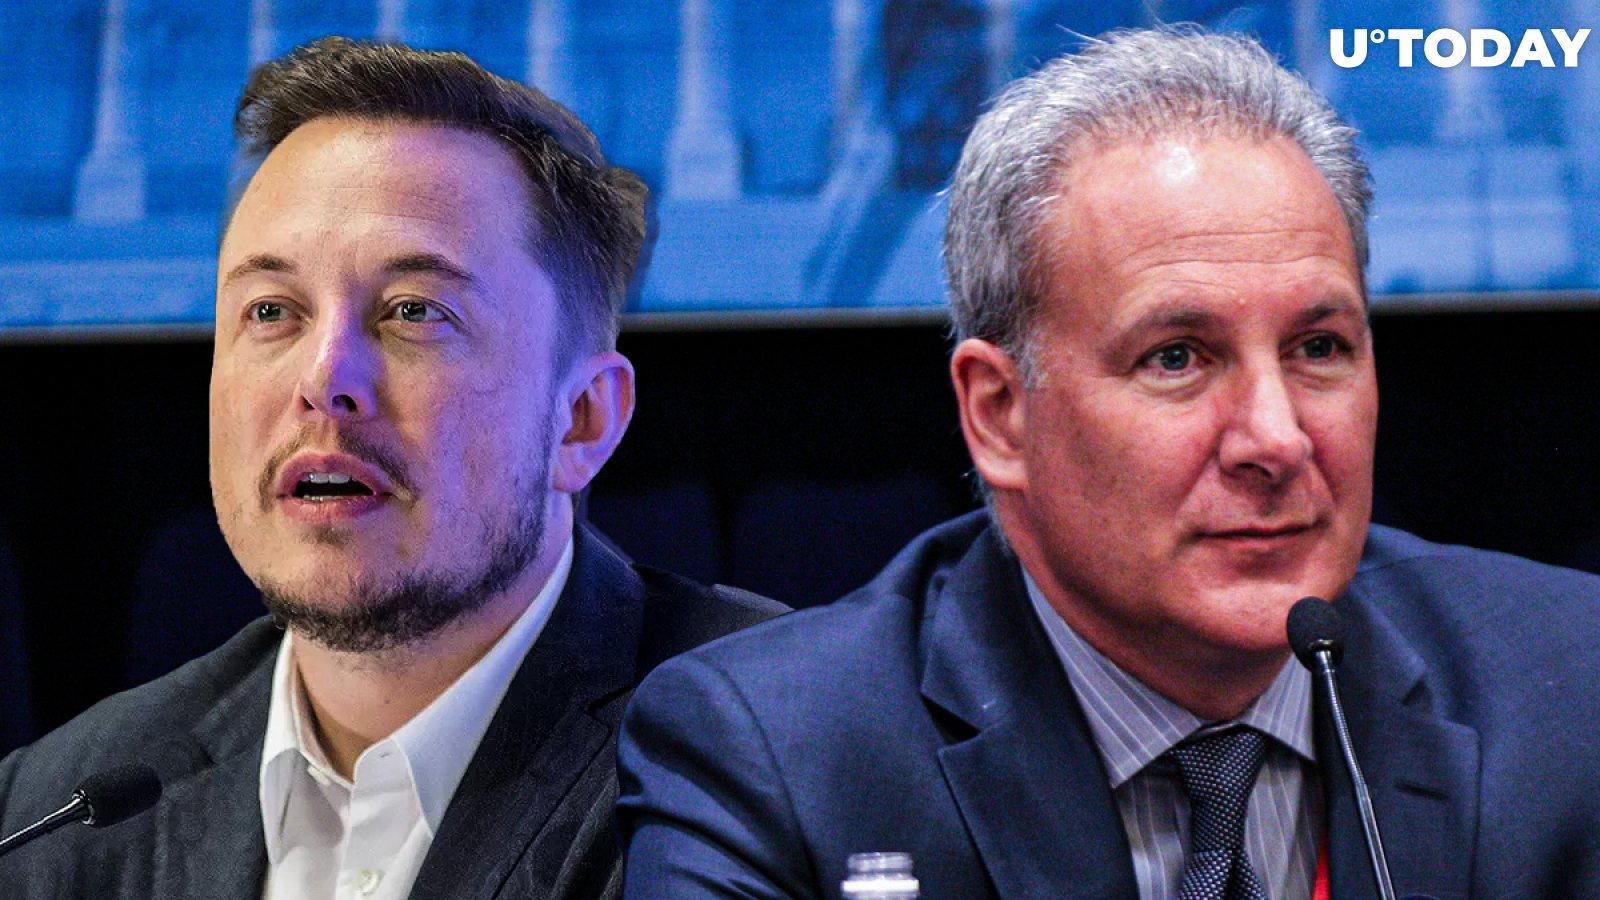 Elon Musk Shills Dogecoin, Because He’s Late to Bitcoin Party: Peter Schiff